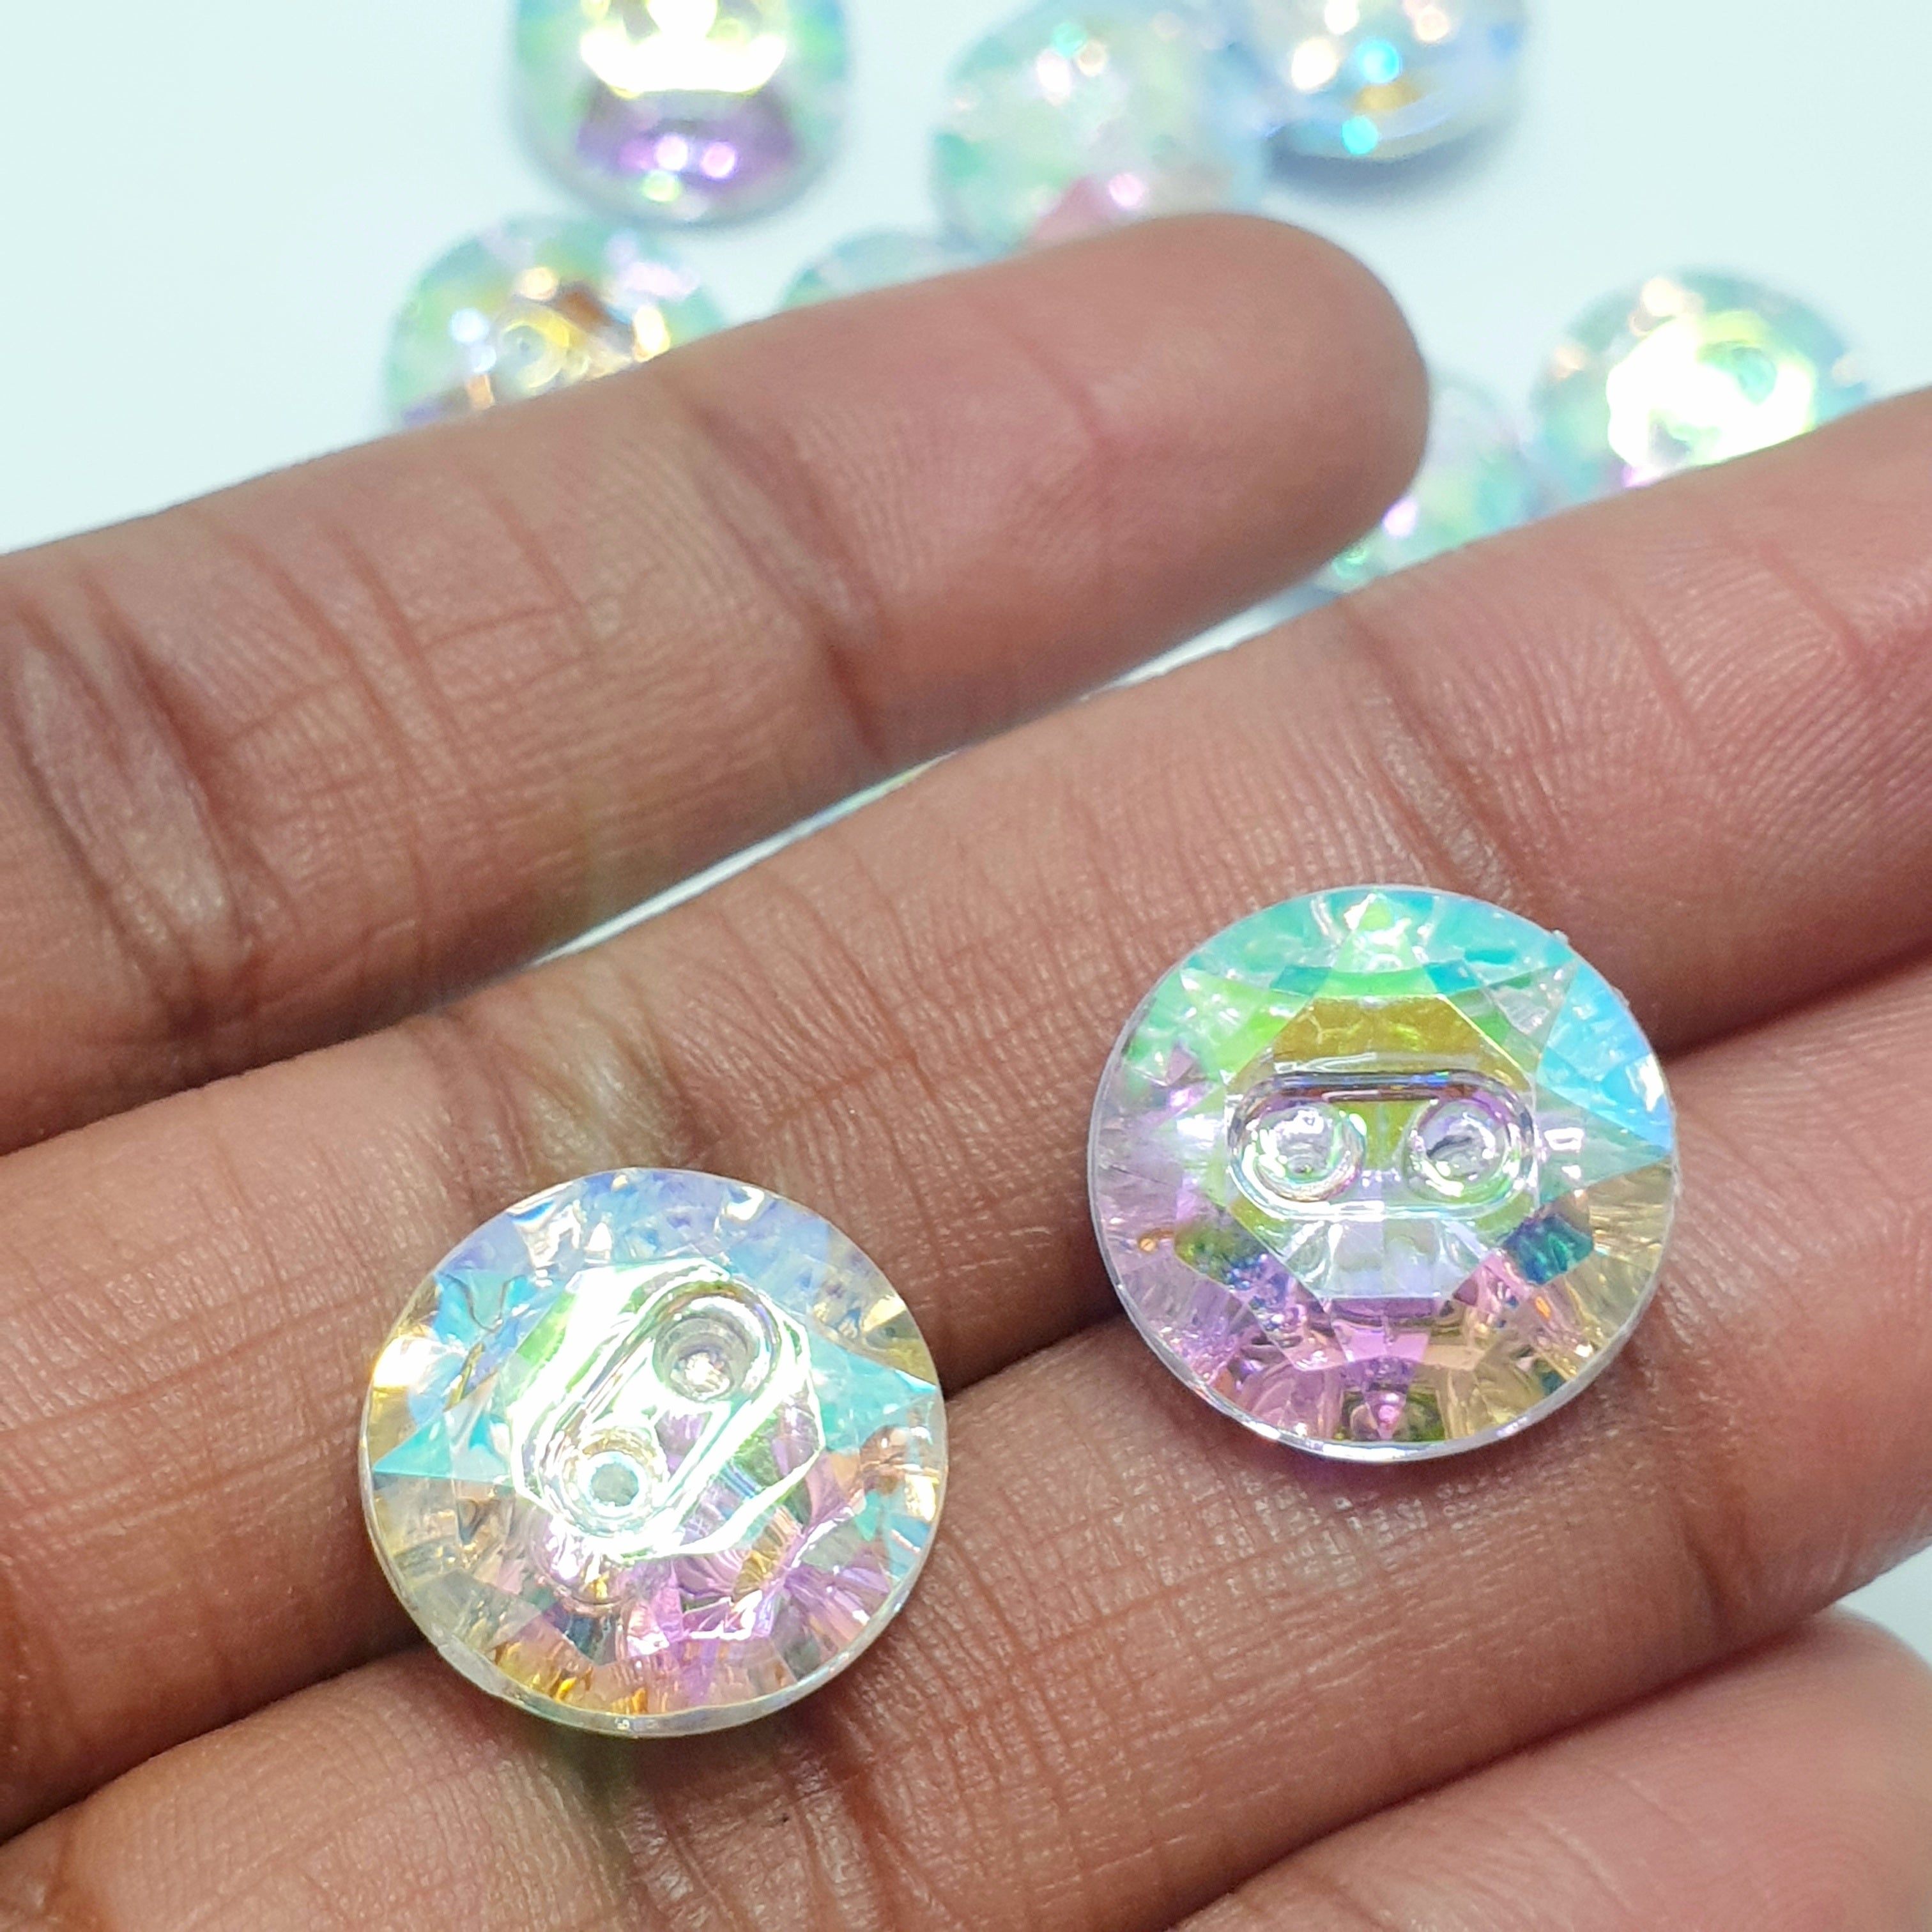 MajorCrafts 20pcs 13.5mm Crystal AB Faceted 2 Holes Round Acrylic Sewing Buttons